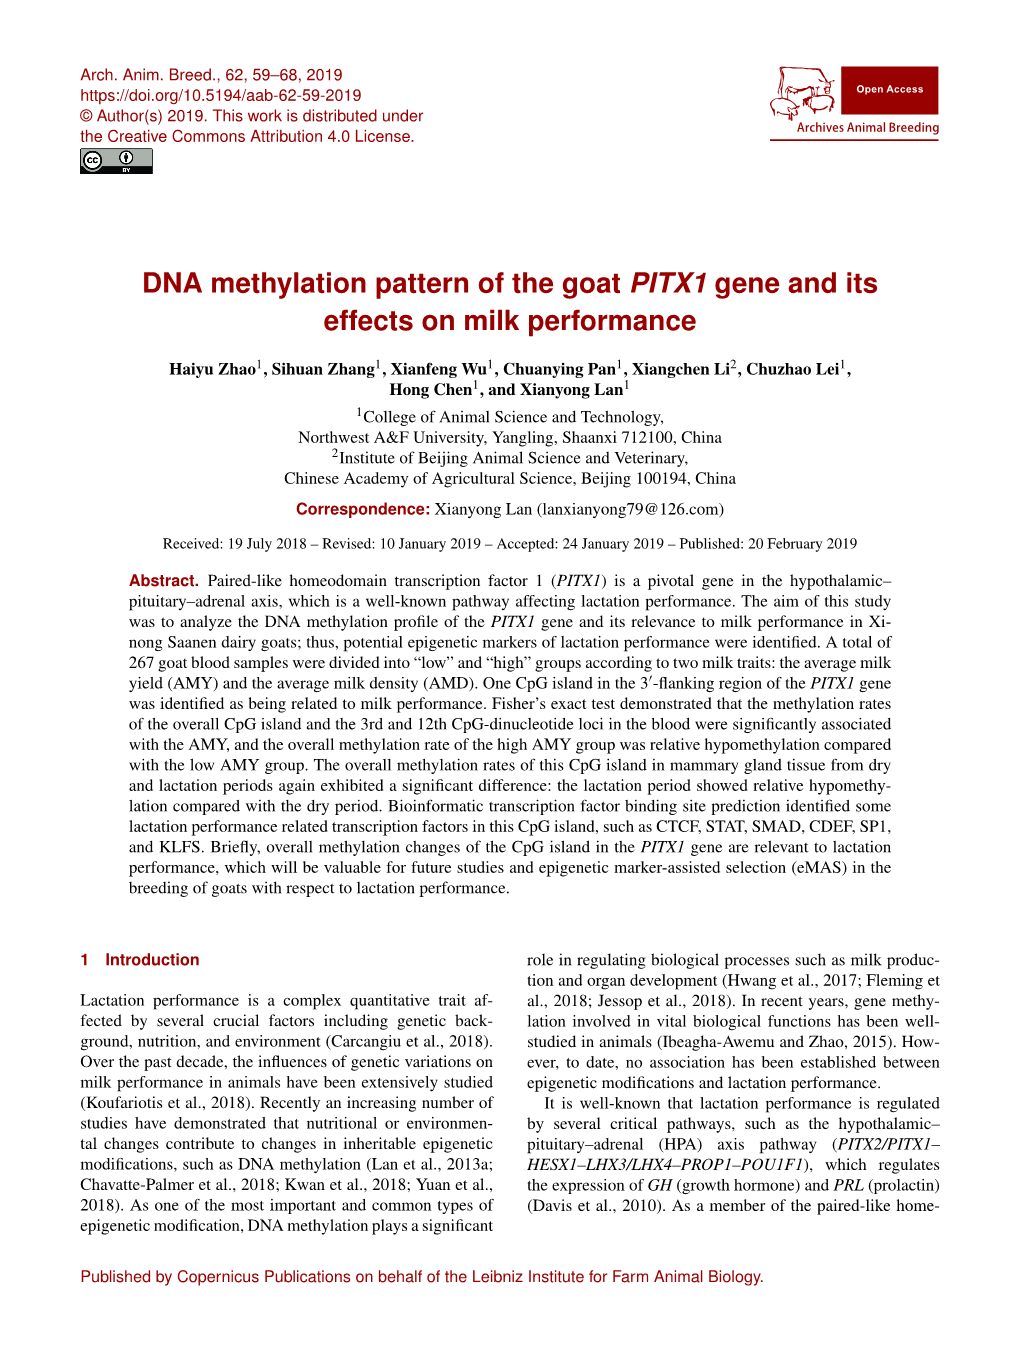 DNA Methylation Pattern of the Goat PITX1 Gene and Its Effects on Milk Performance